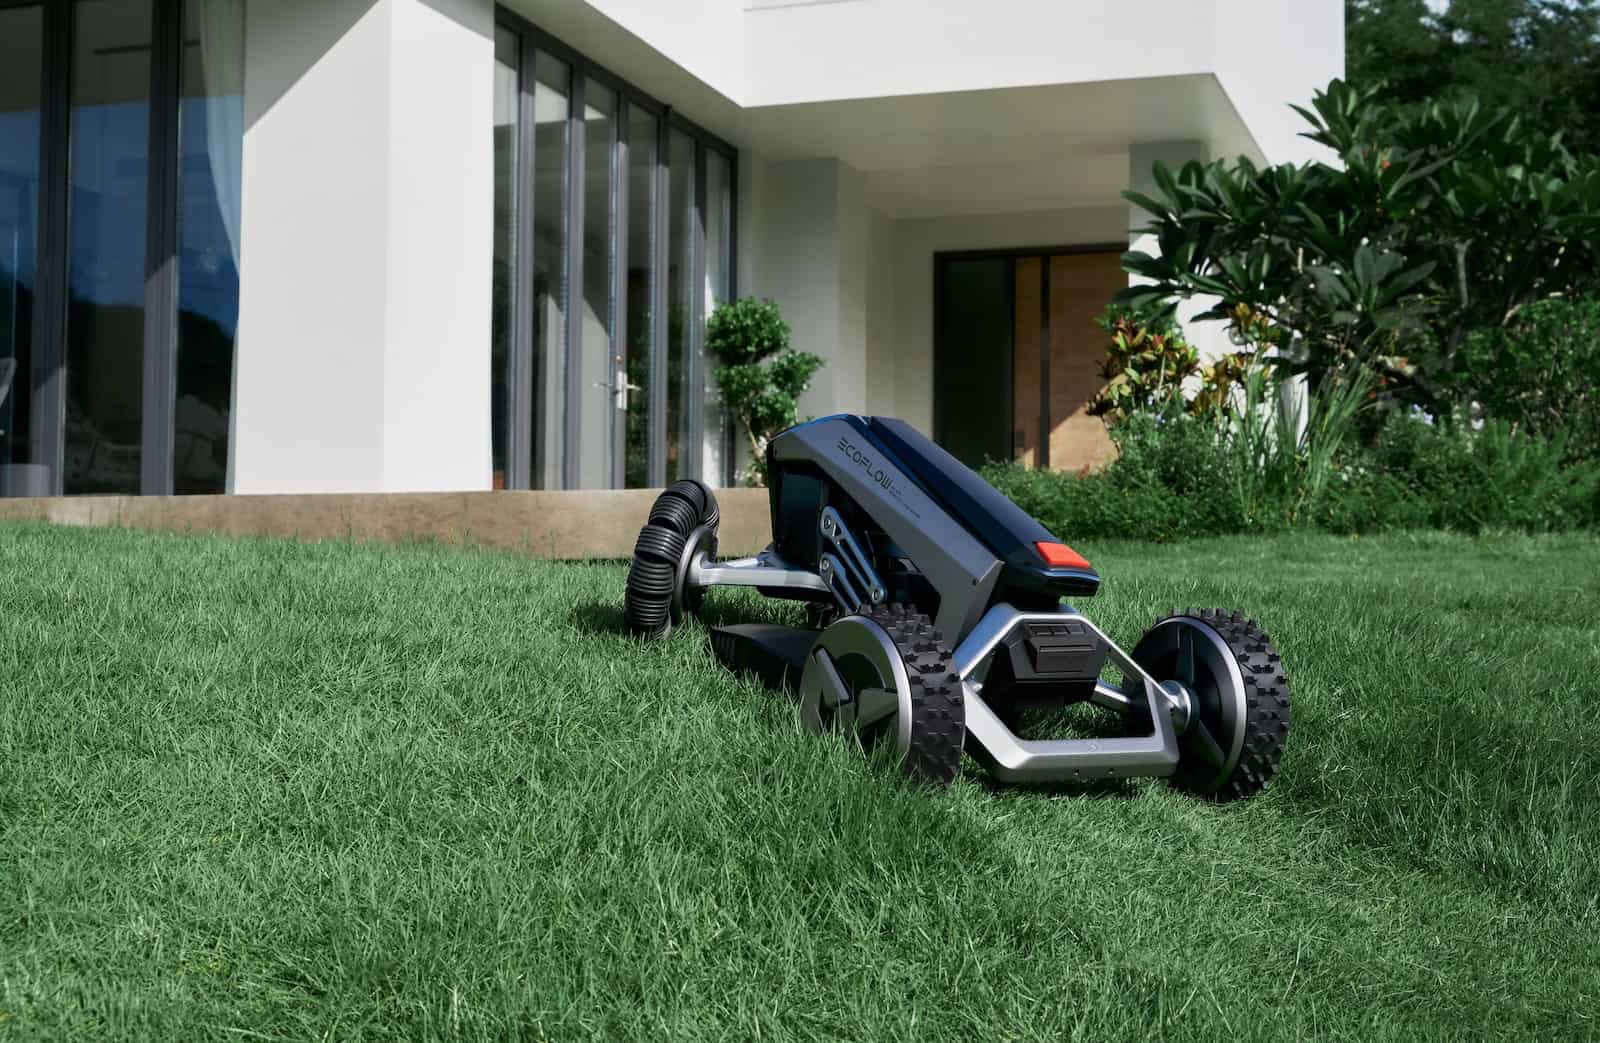 Learn How to Mow a Lawn Like a Pro With Our Lawn Care Guide